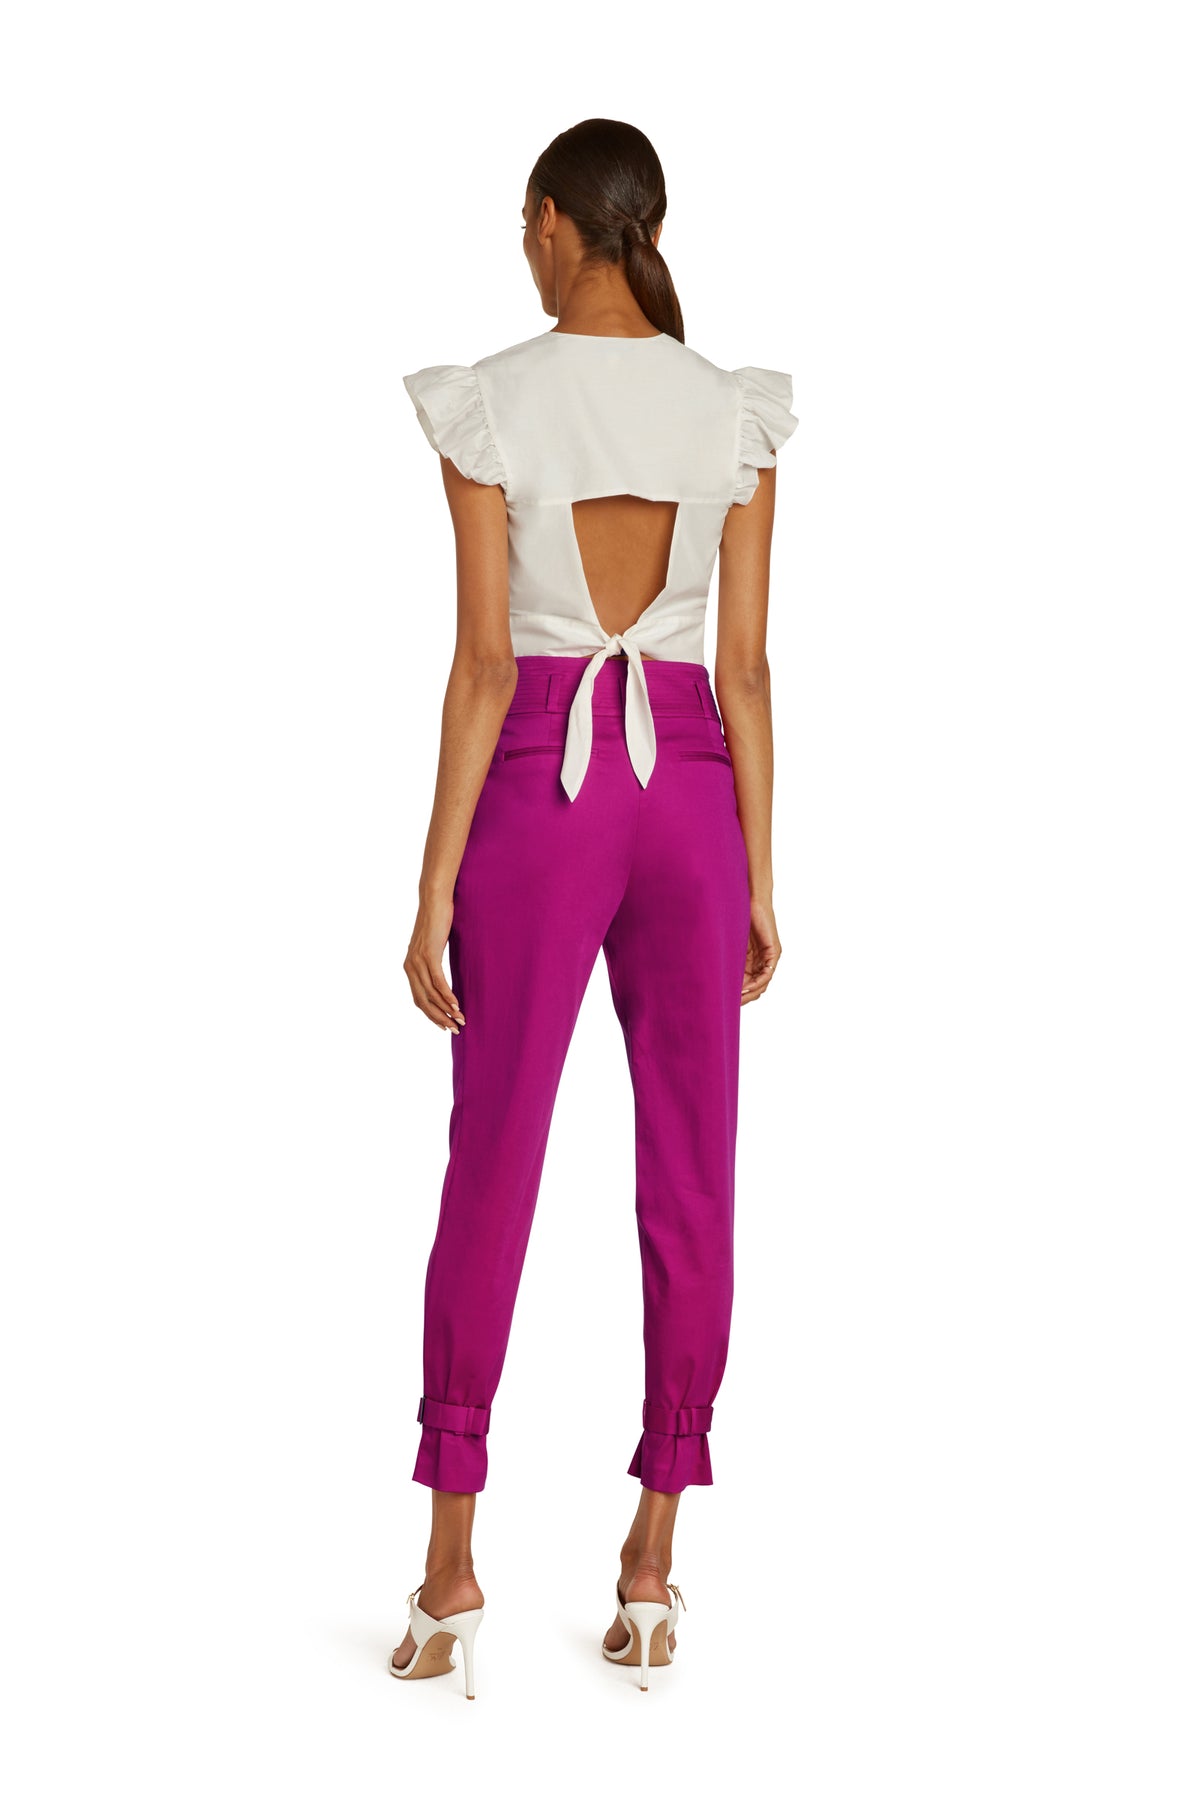 Marie Cotton High Waist Pants in Hot Pink